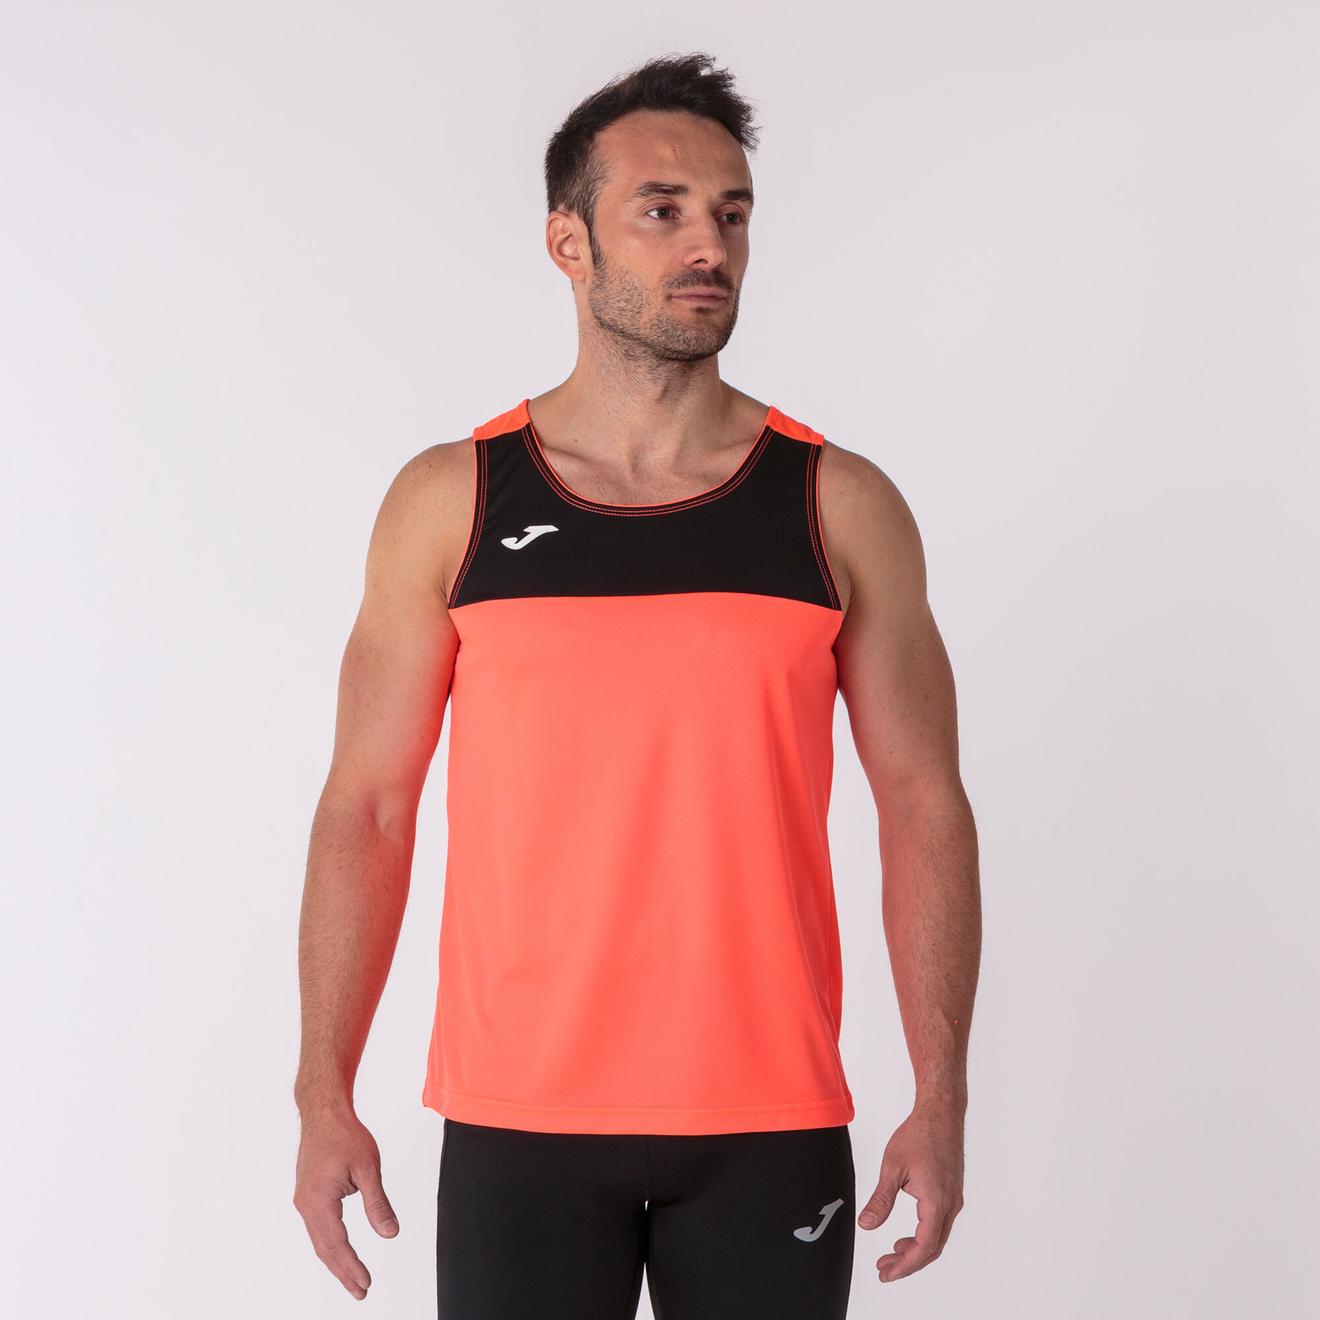 Sleeveless t-shirt man Race coral black offers at £6 in Joma